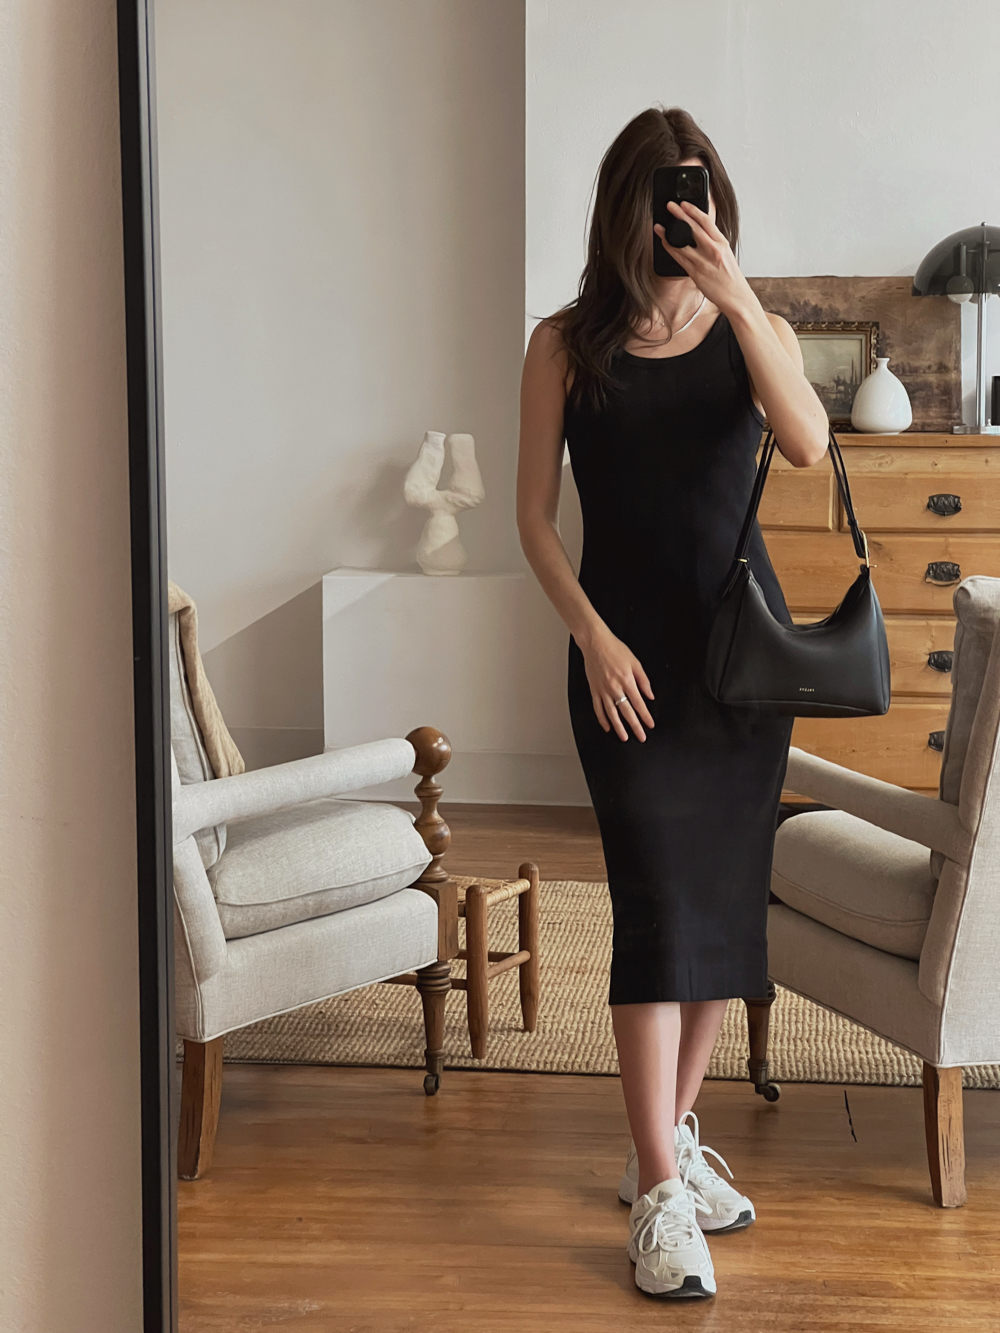 This Everlane dress is perfect and I